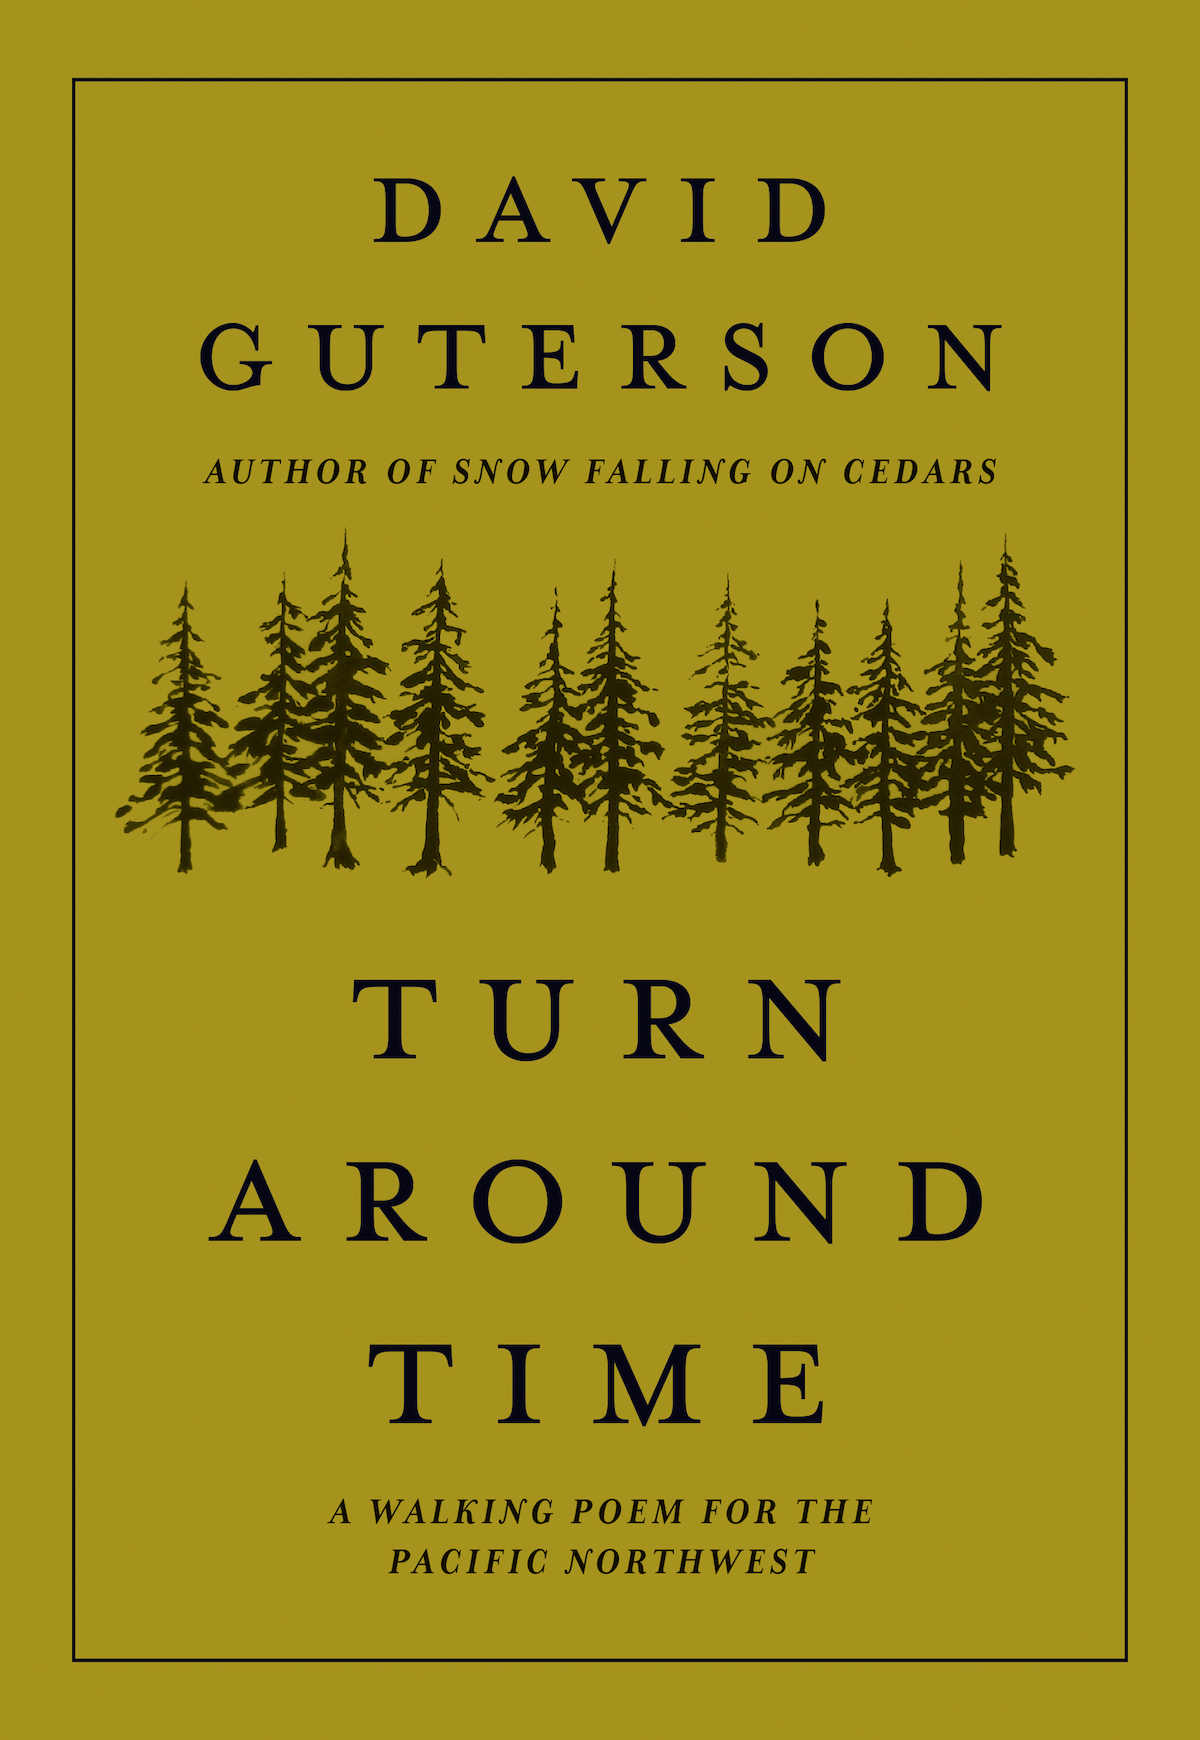 [Cover] Turn Around Time: A Walking Poem for the Pacific Northwest. David Guterson. Illustrations by Justin Gibbens. Mountaineers Books. Hardcover, 144 Pages. $21.95.